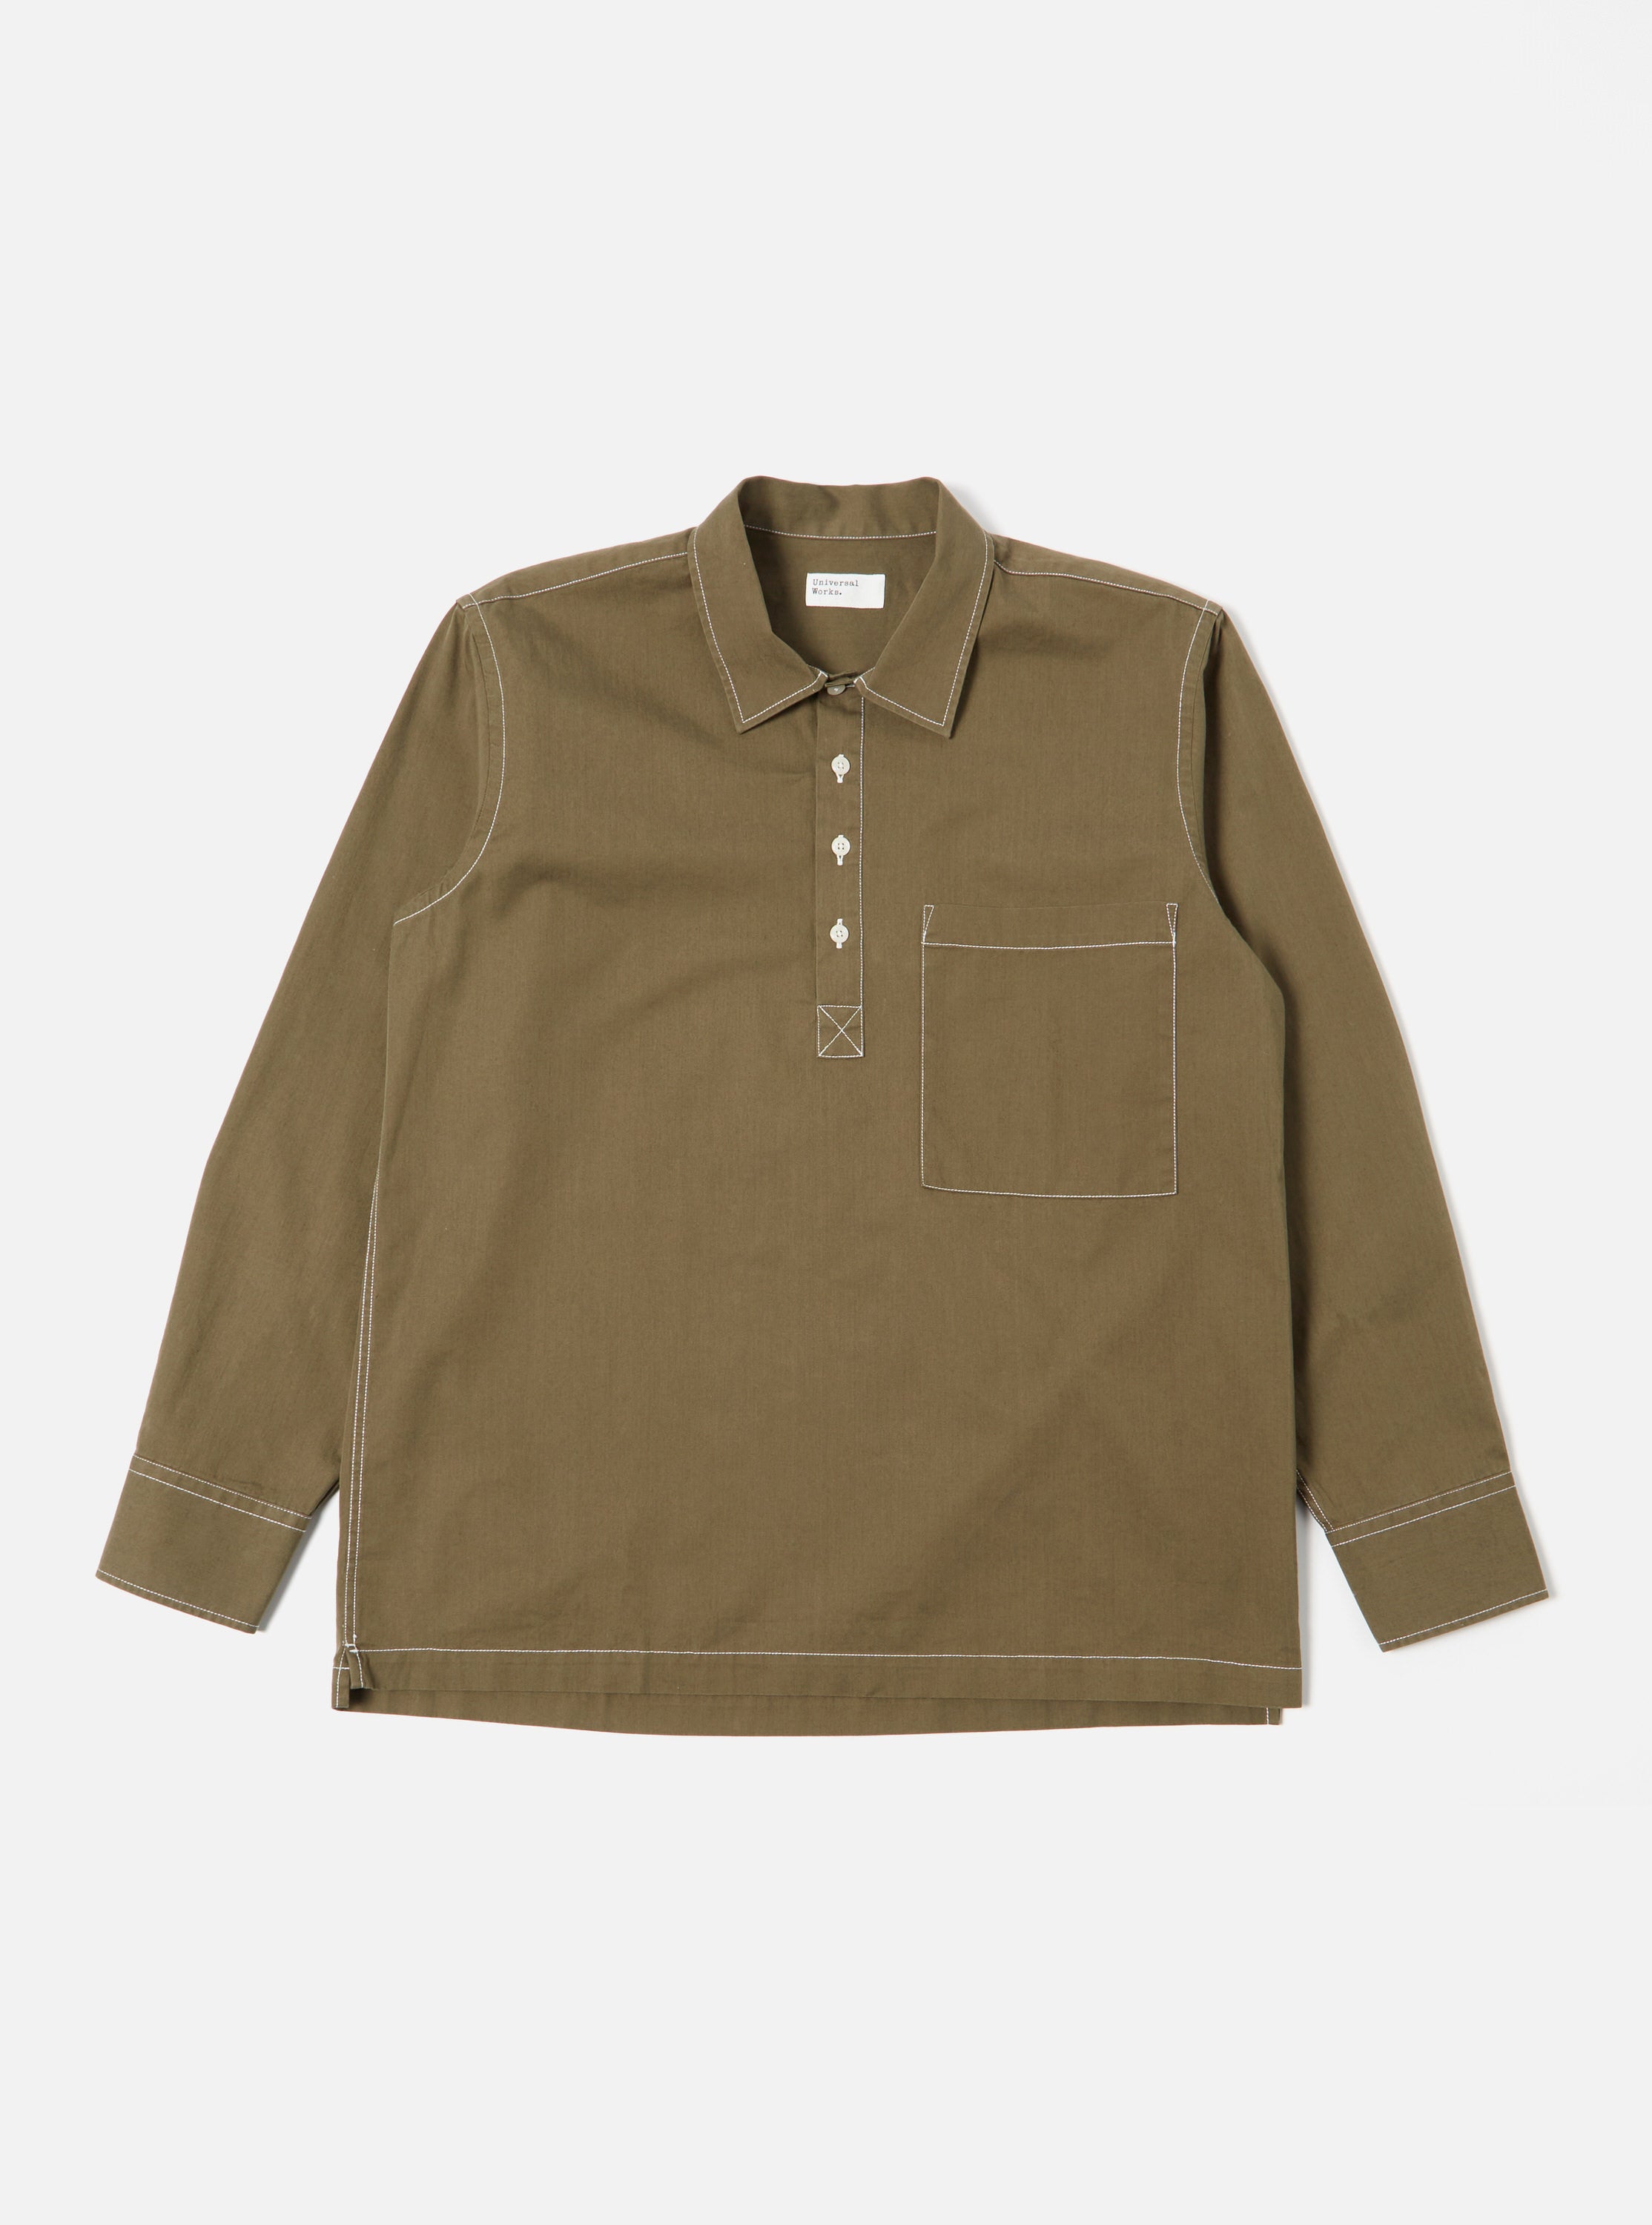 Universal Works Pullover L/S Shirt in Olive Scuba Cotton